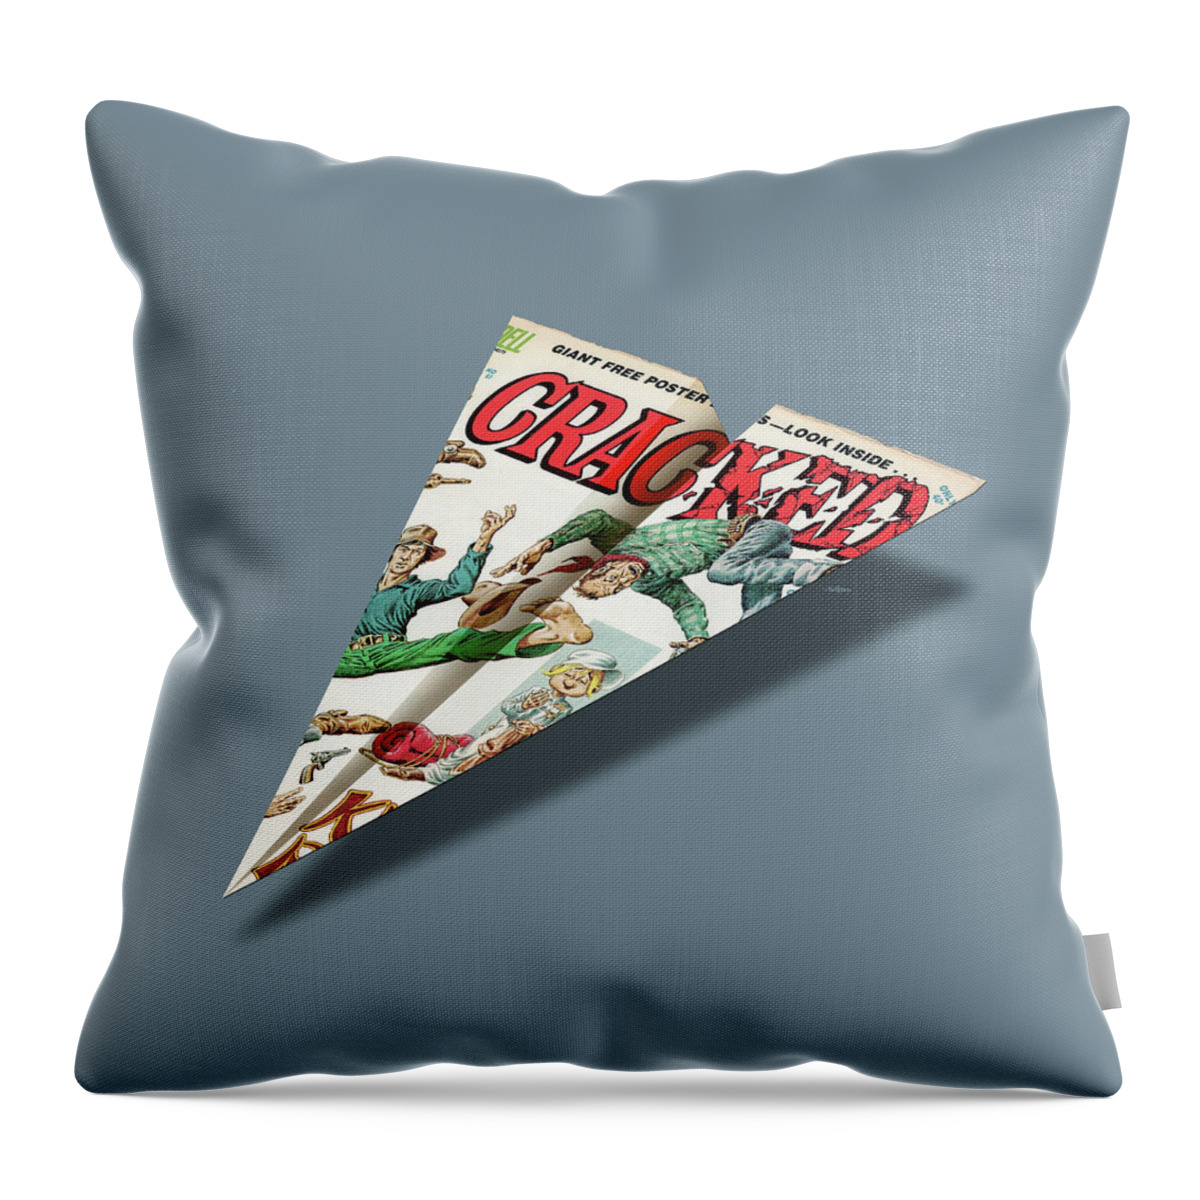 109 Throw Pillow featuring the digital art 112 Cracked MAD Paper Airplanes by YoPedro